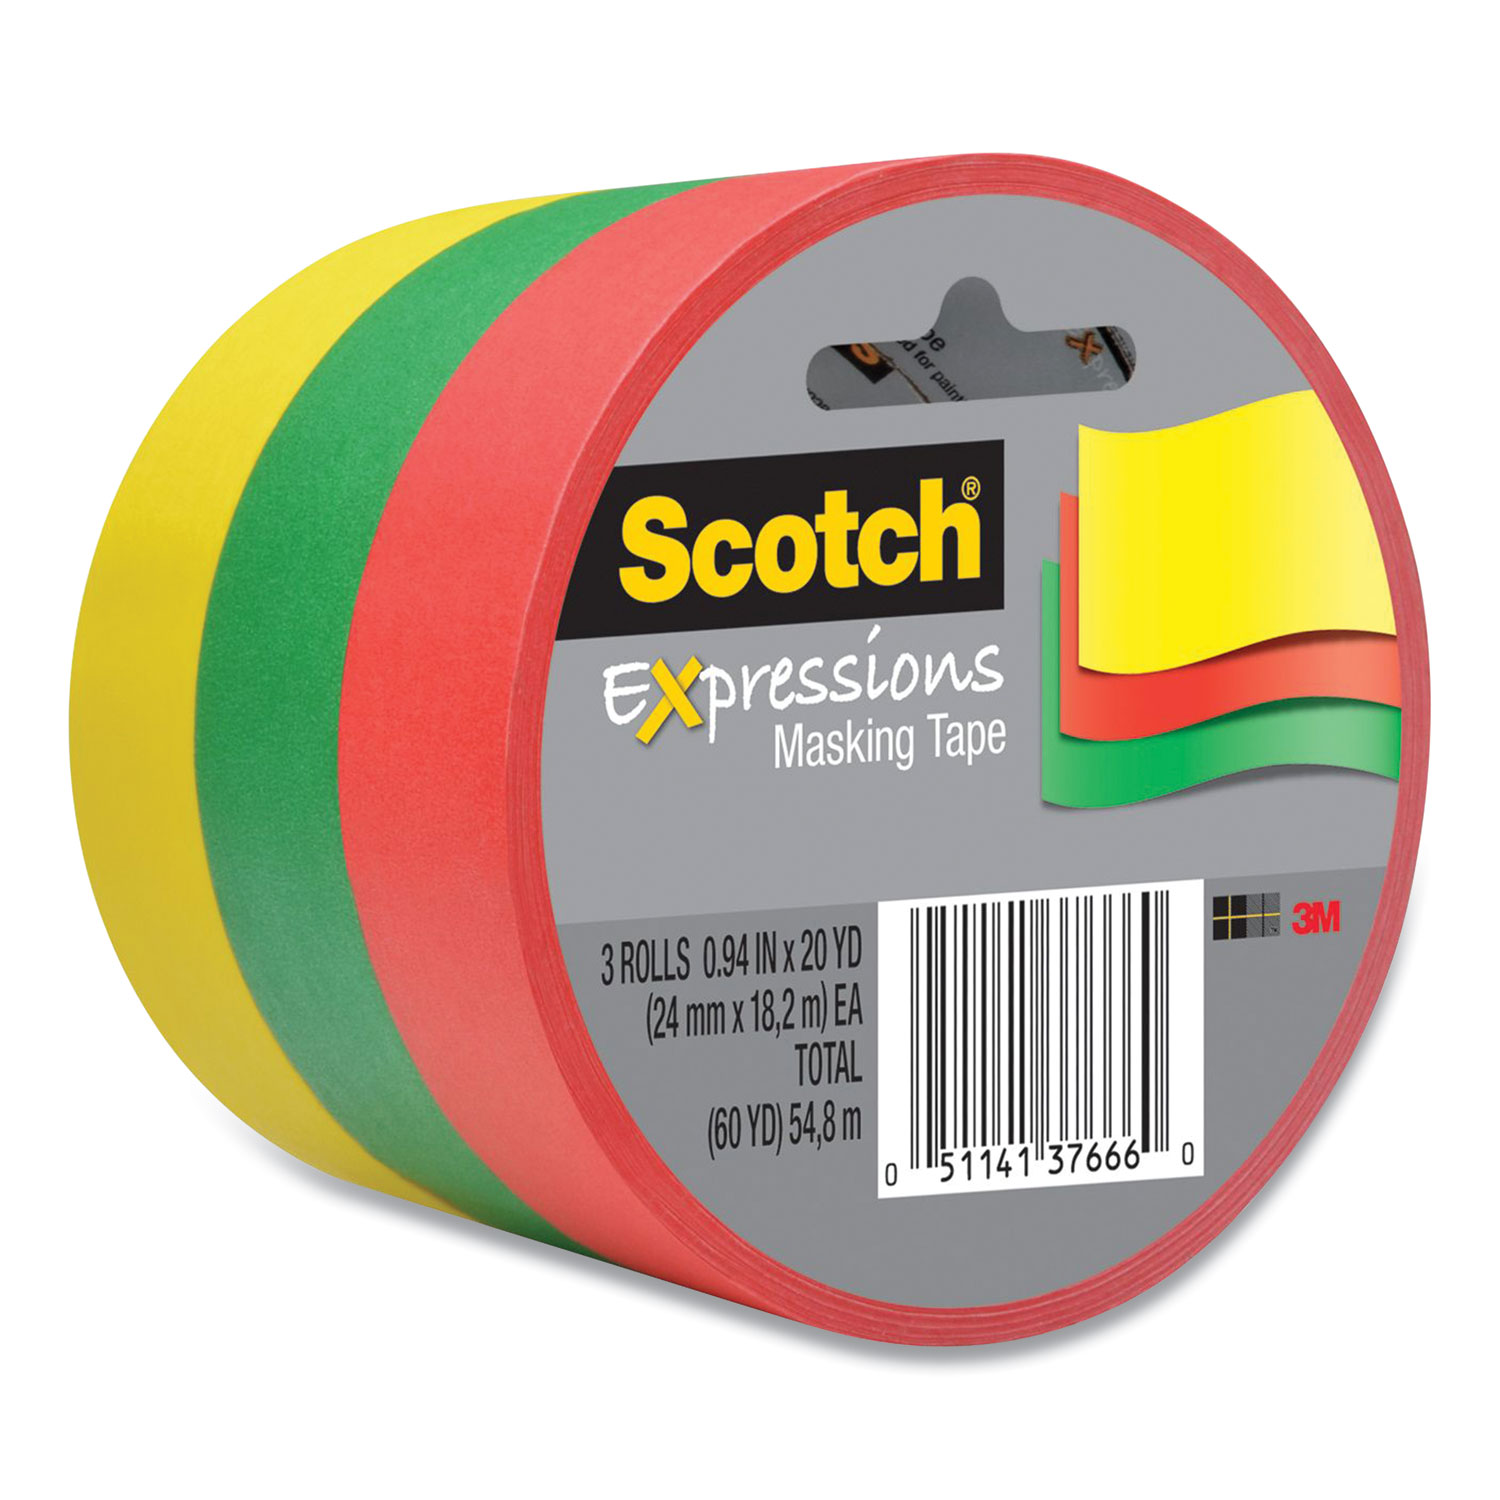 Scotch® Expressions Masking Tape, 3 Core, 0.94 x 20 yds, Red, Green, Yellow, 3 Rolls/Pack